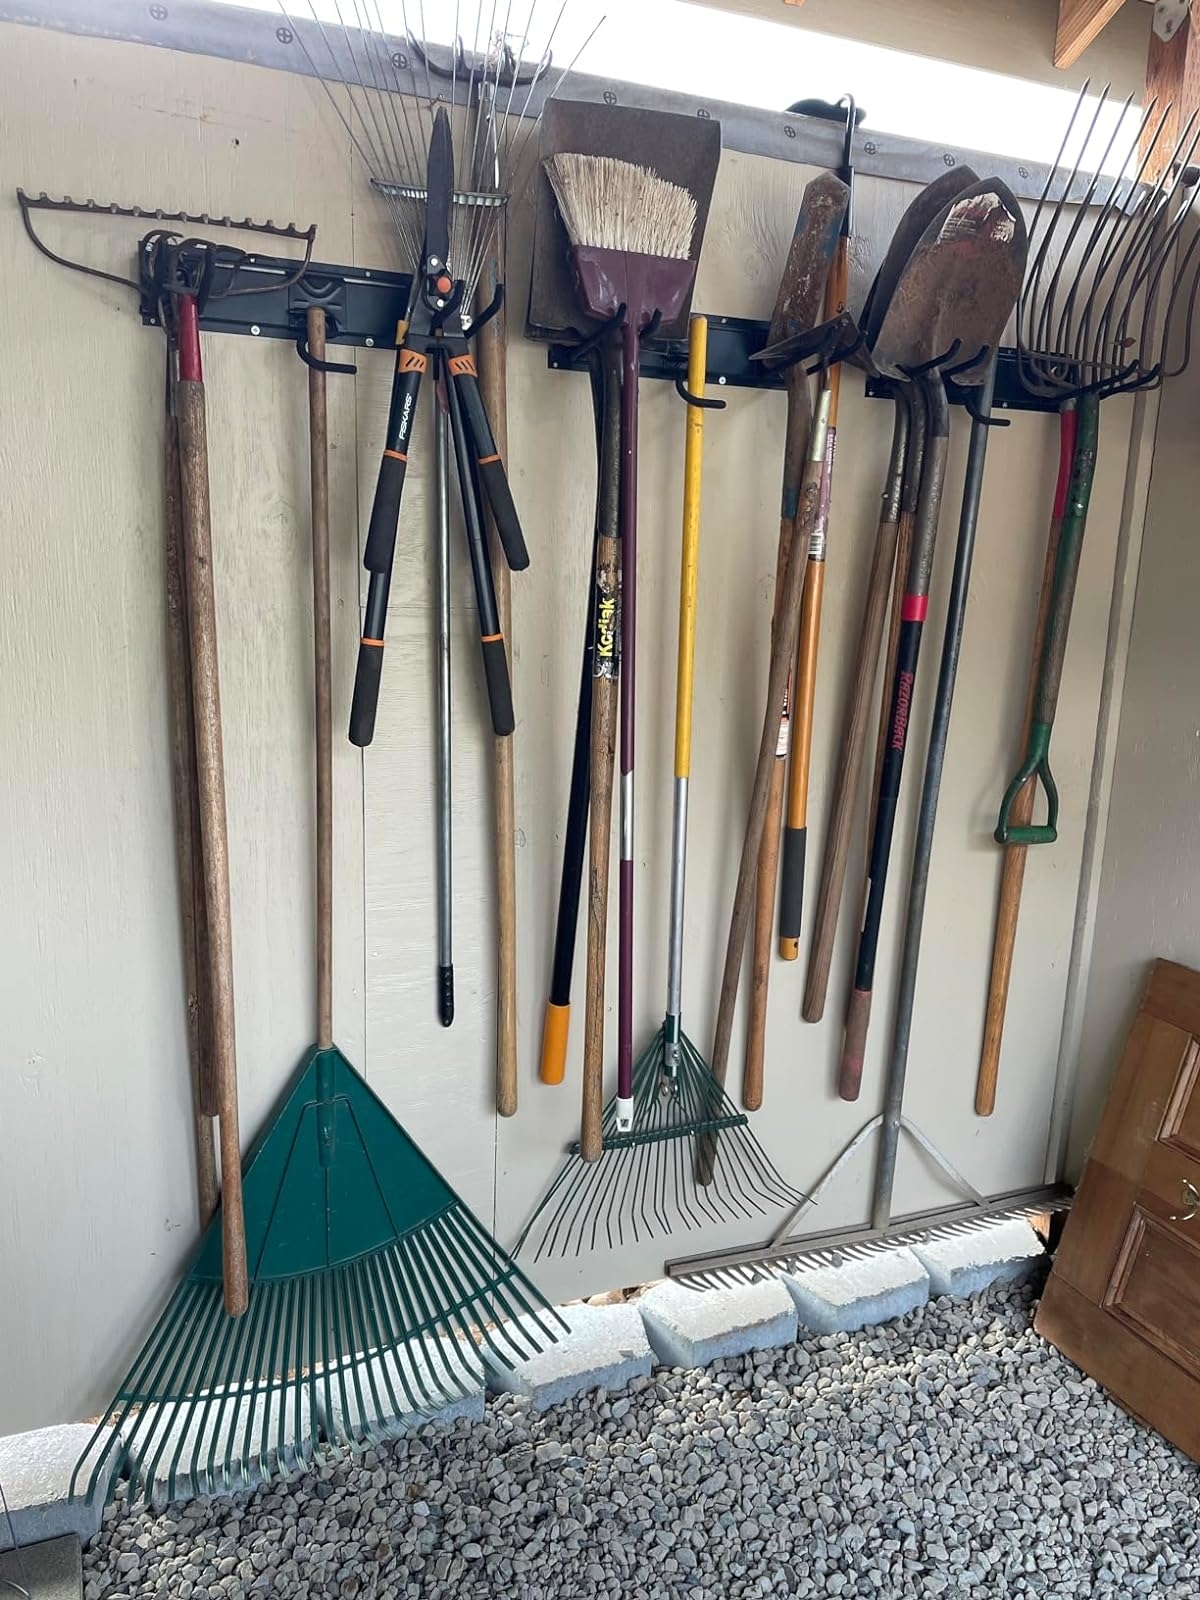 Assorted garden tools, including rakes and shovels, neatly hung on a wall for organization